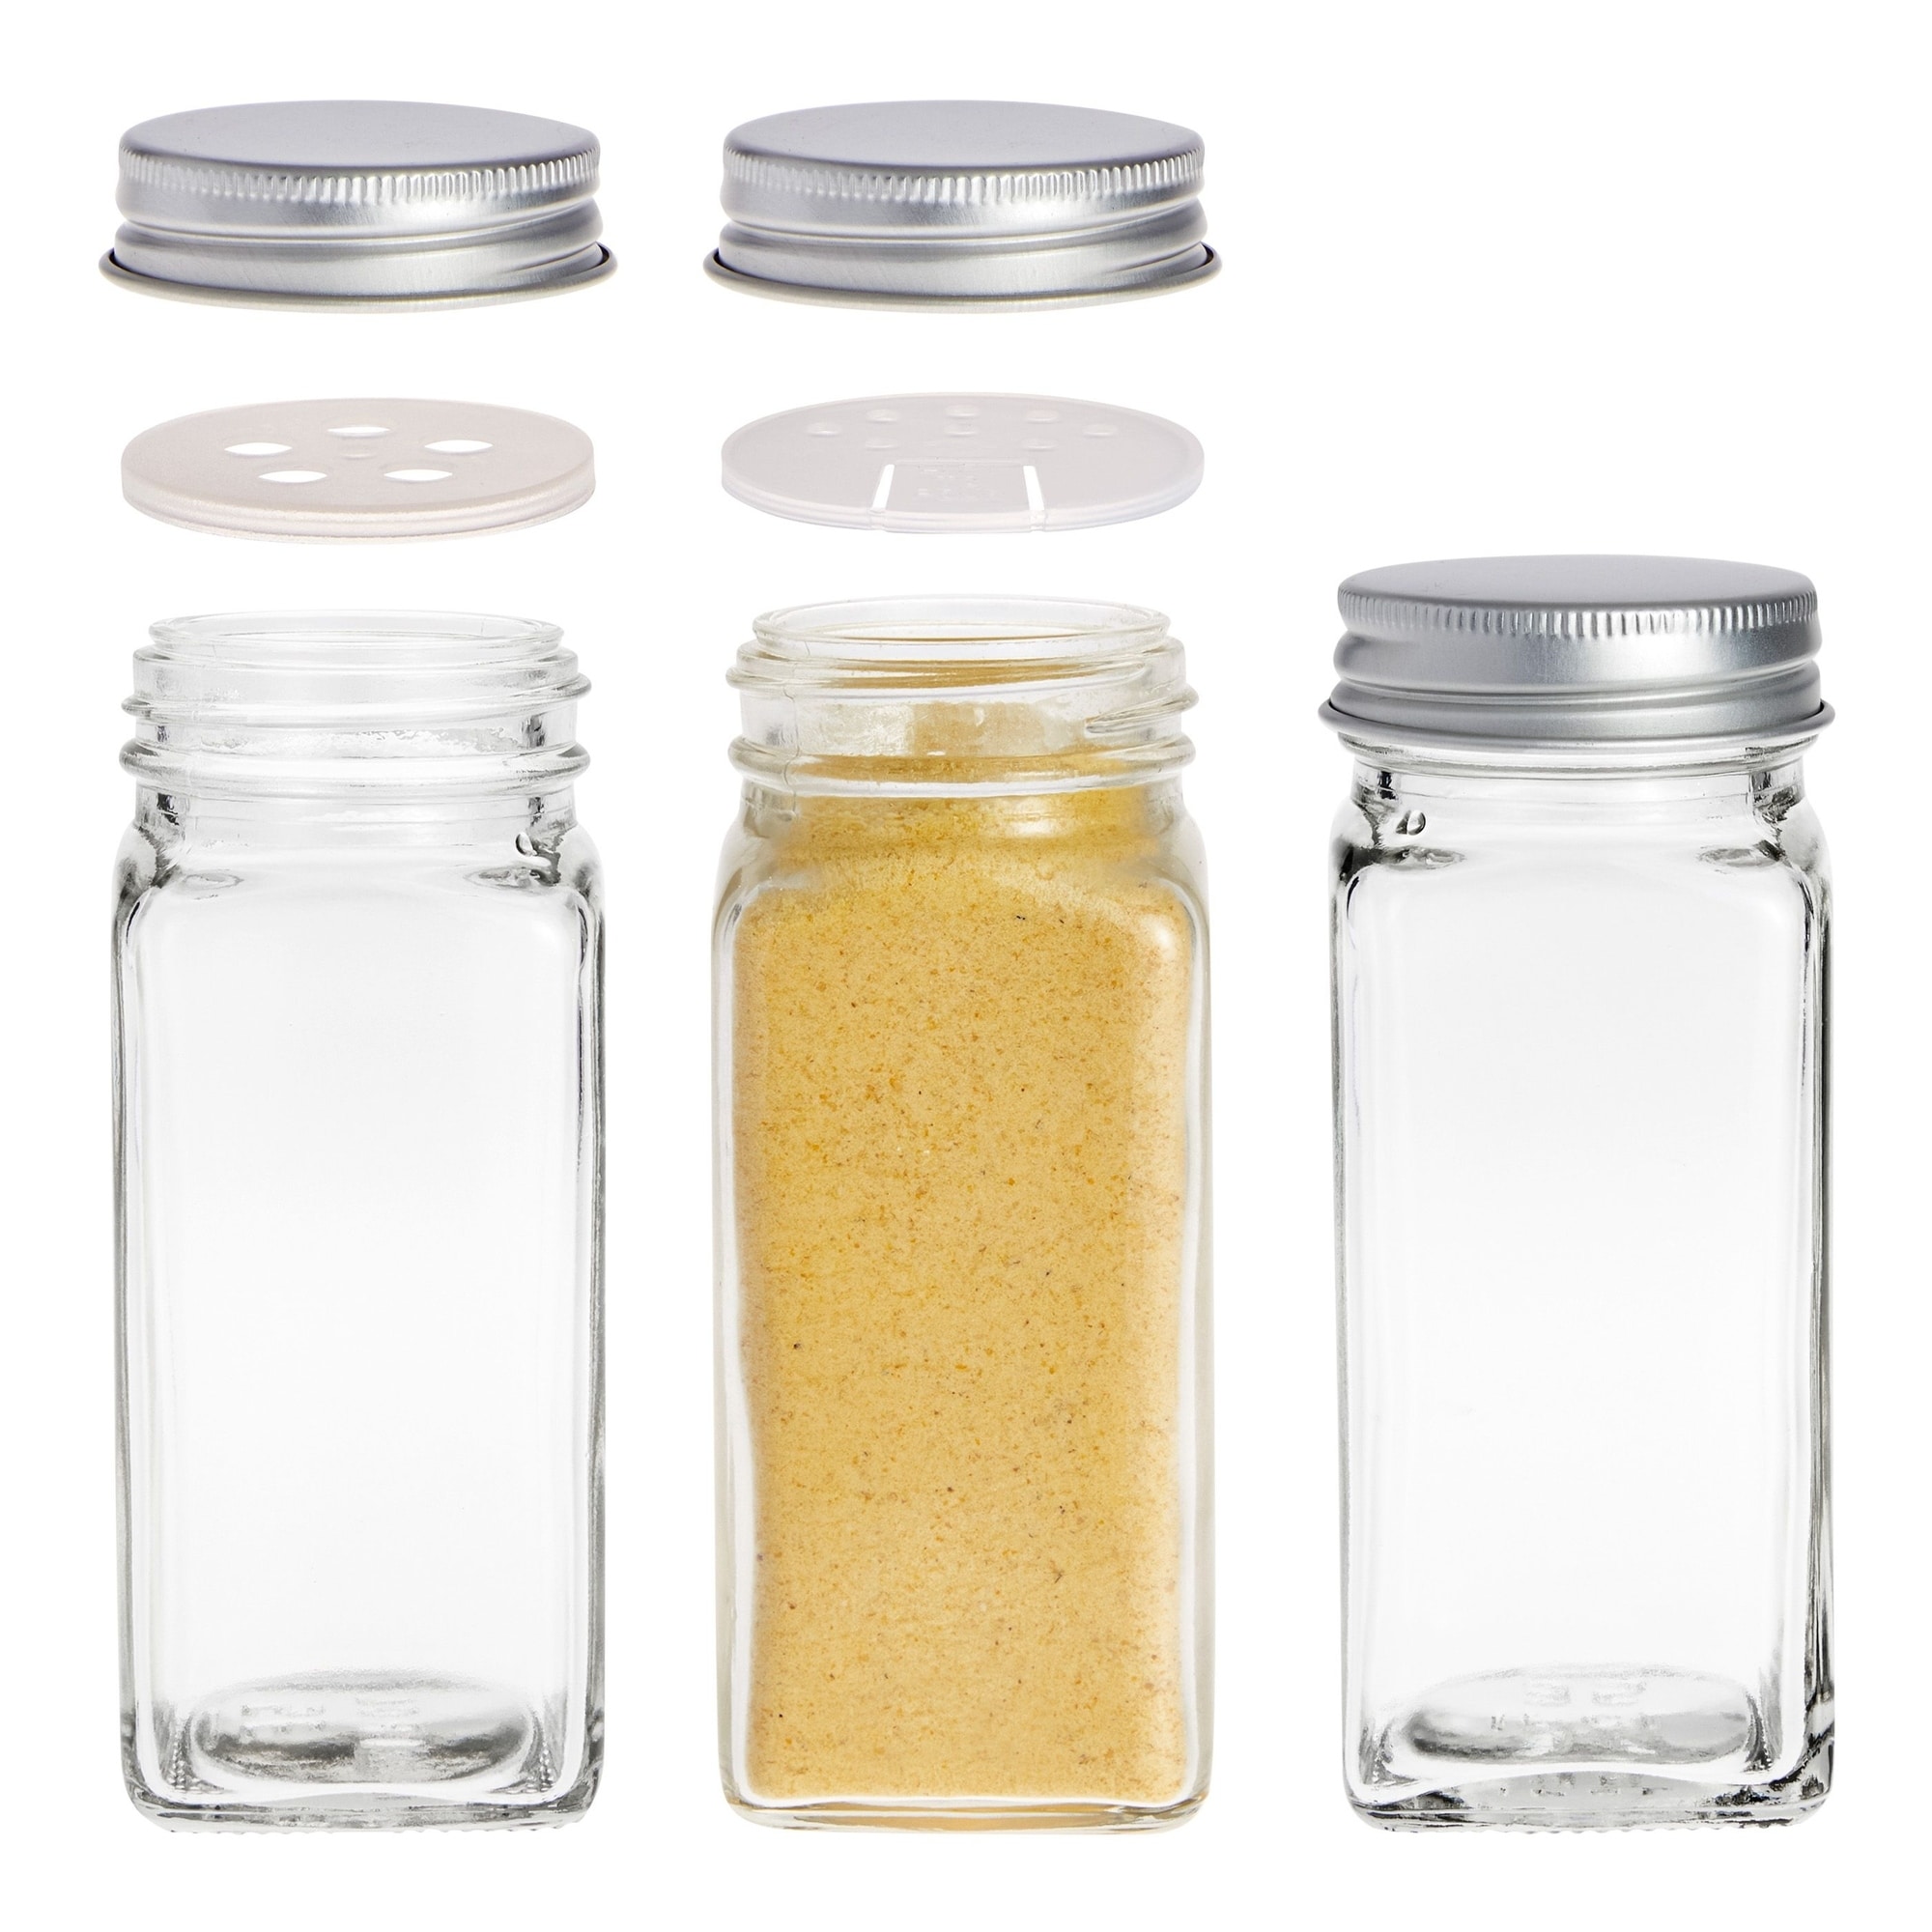 https://ak1.ostkcdn.com/images/products/is/images/direct/ae49aaed548f71ace682ba0b245b04fed50118f0/Talented-Kitchen-Spice-Drawer-Organizer-with-Jars-and-Labels-with-18-Empty-4-oz-Spice-Bottles%2C-416-Seasoning-Label-%285.9-x-15-In%29.jpg